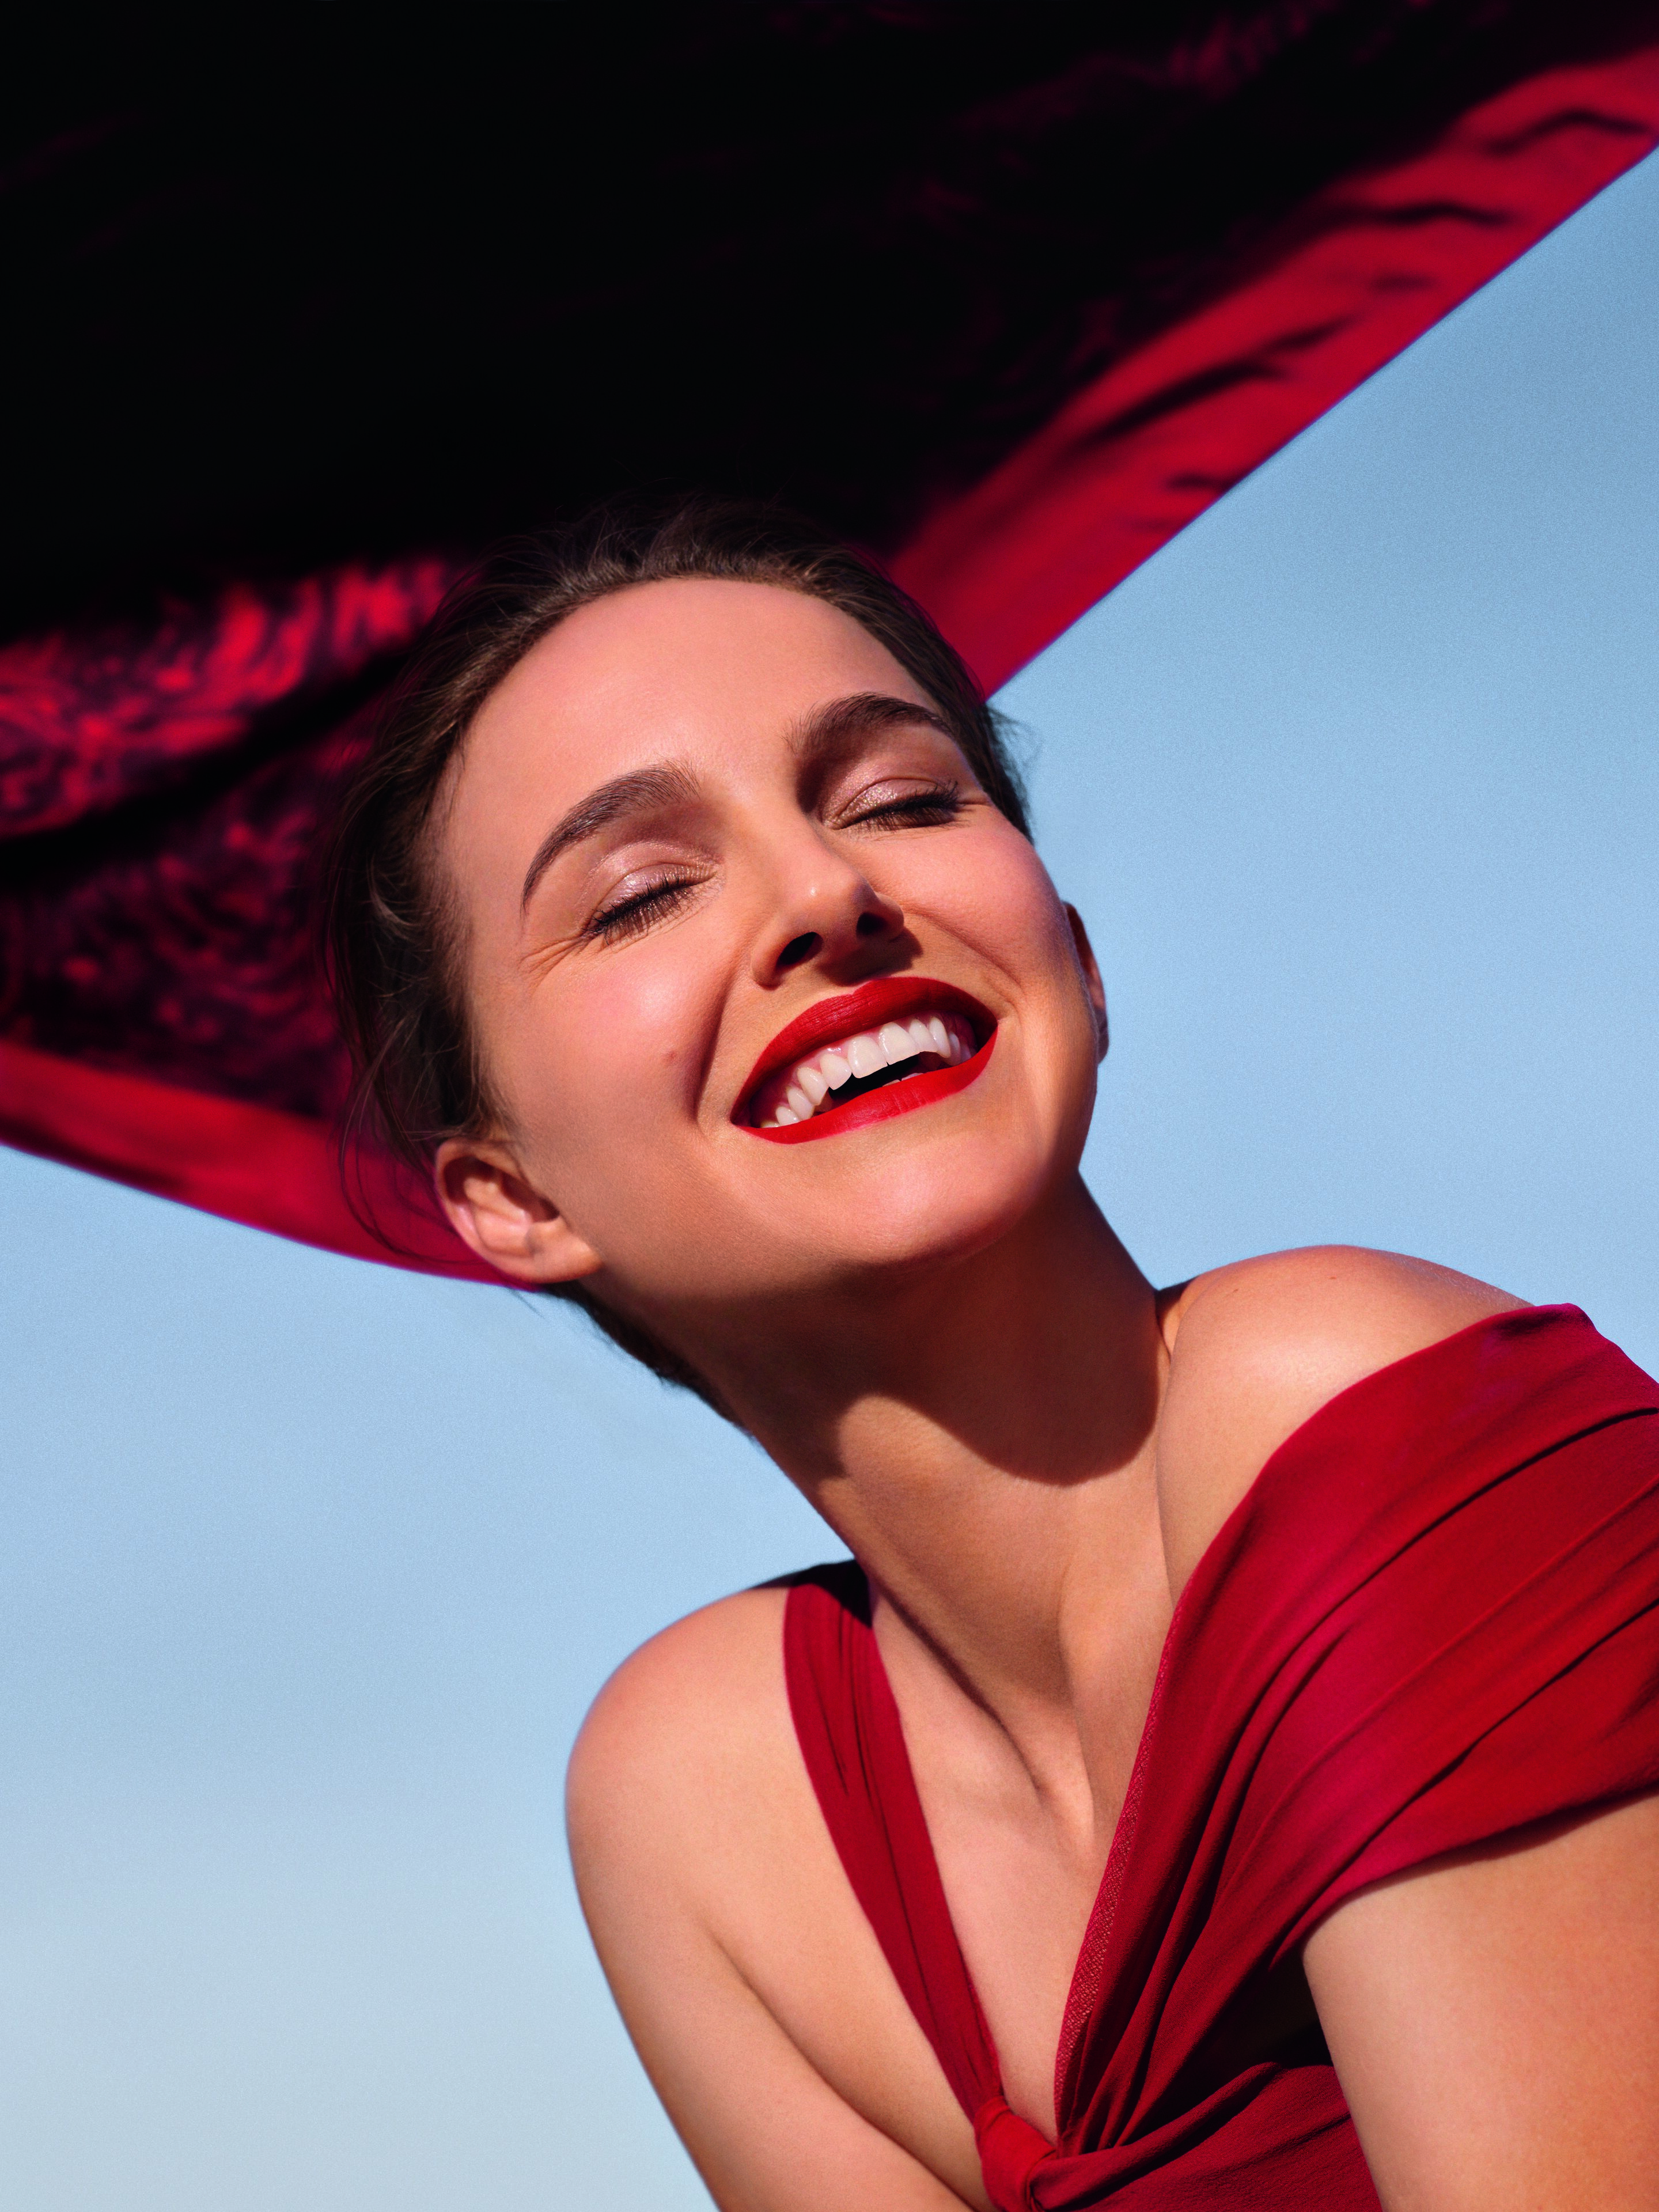 Natalie Portman on Her Favorite Dior Lipstick and Returning to 'Thor